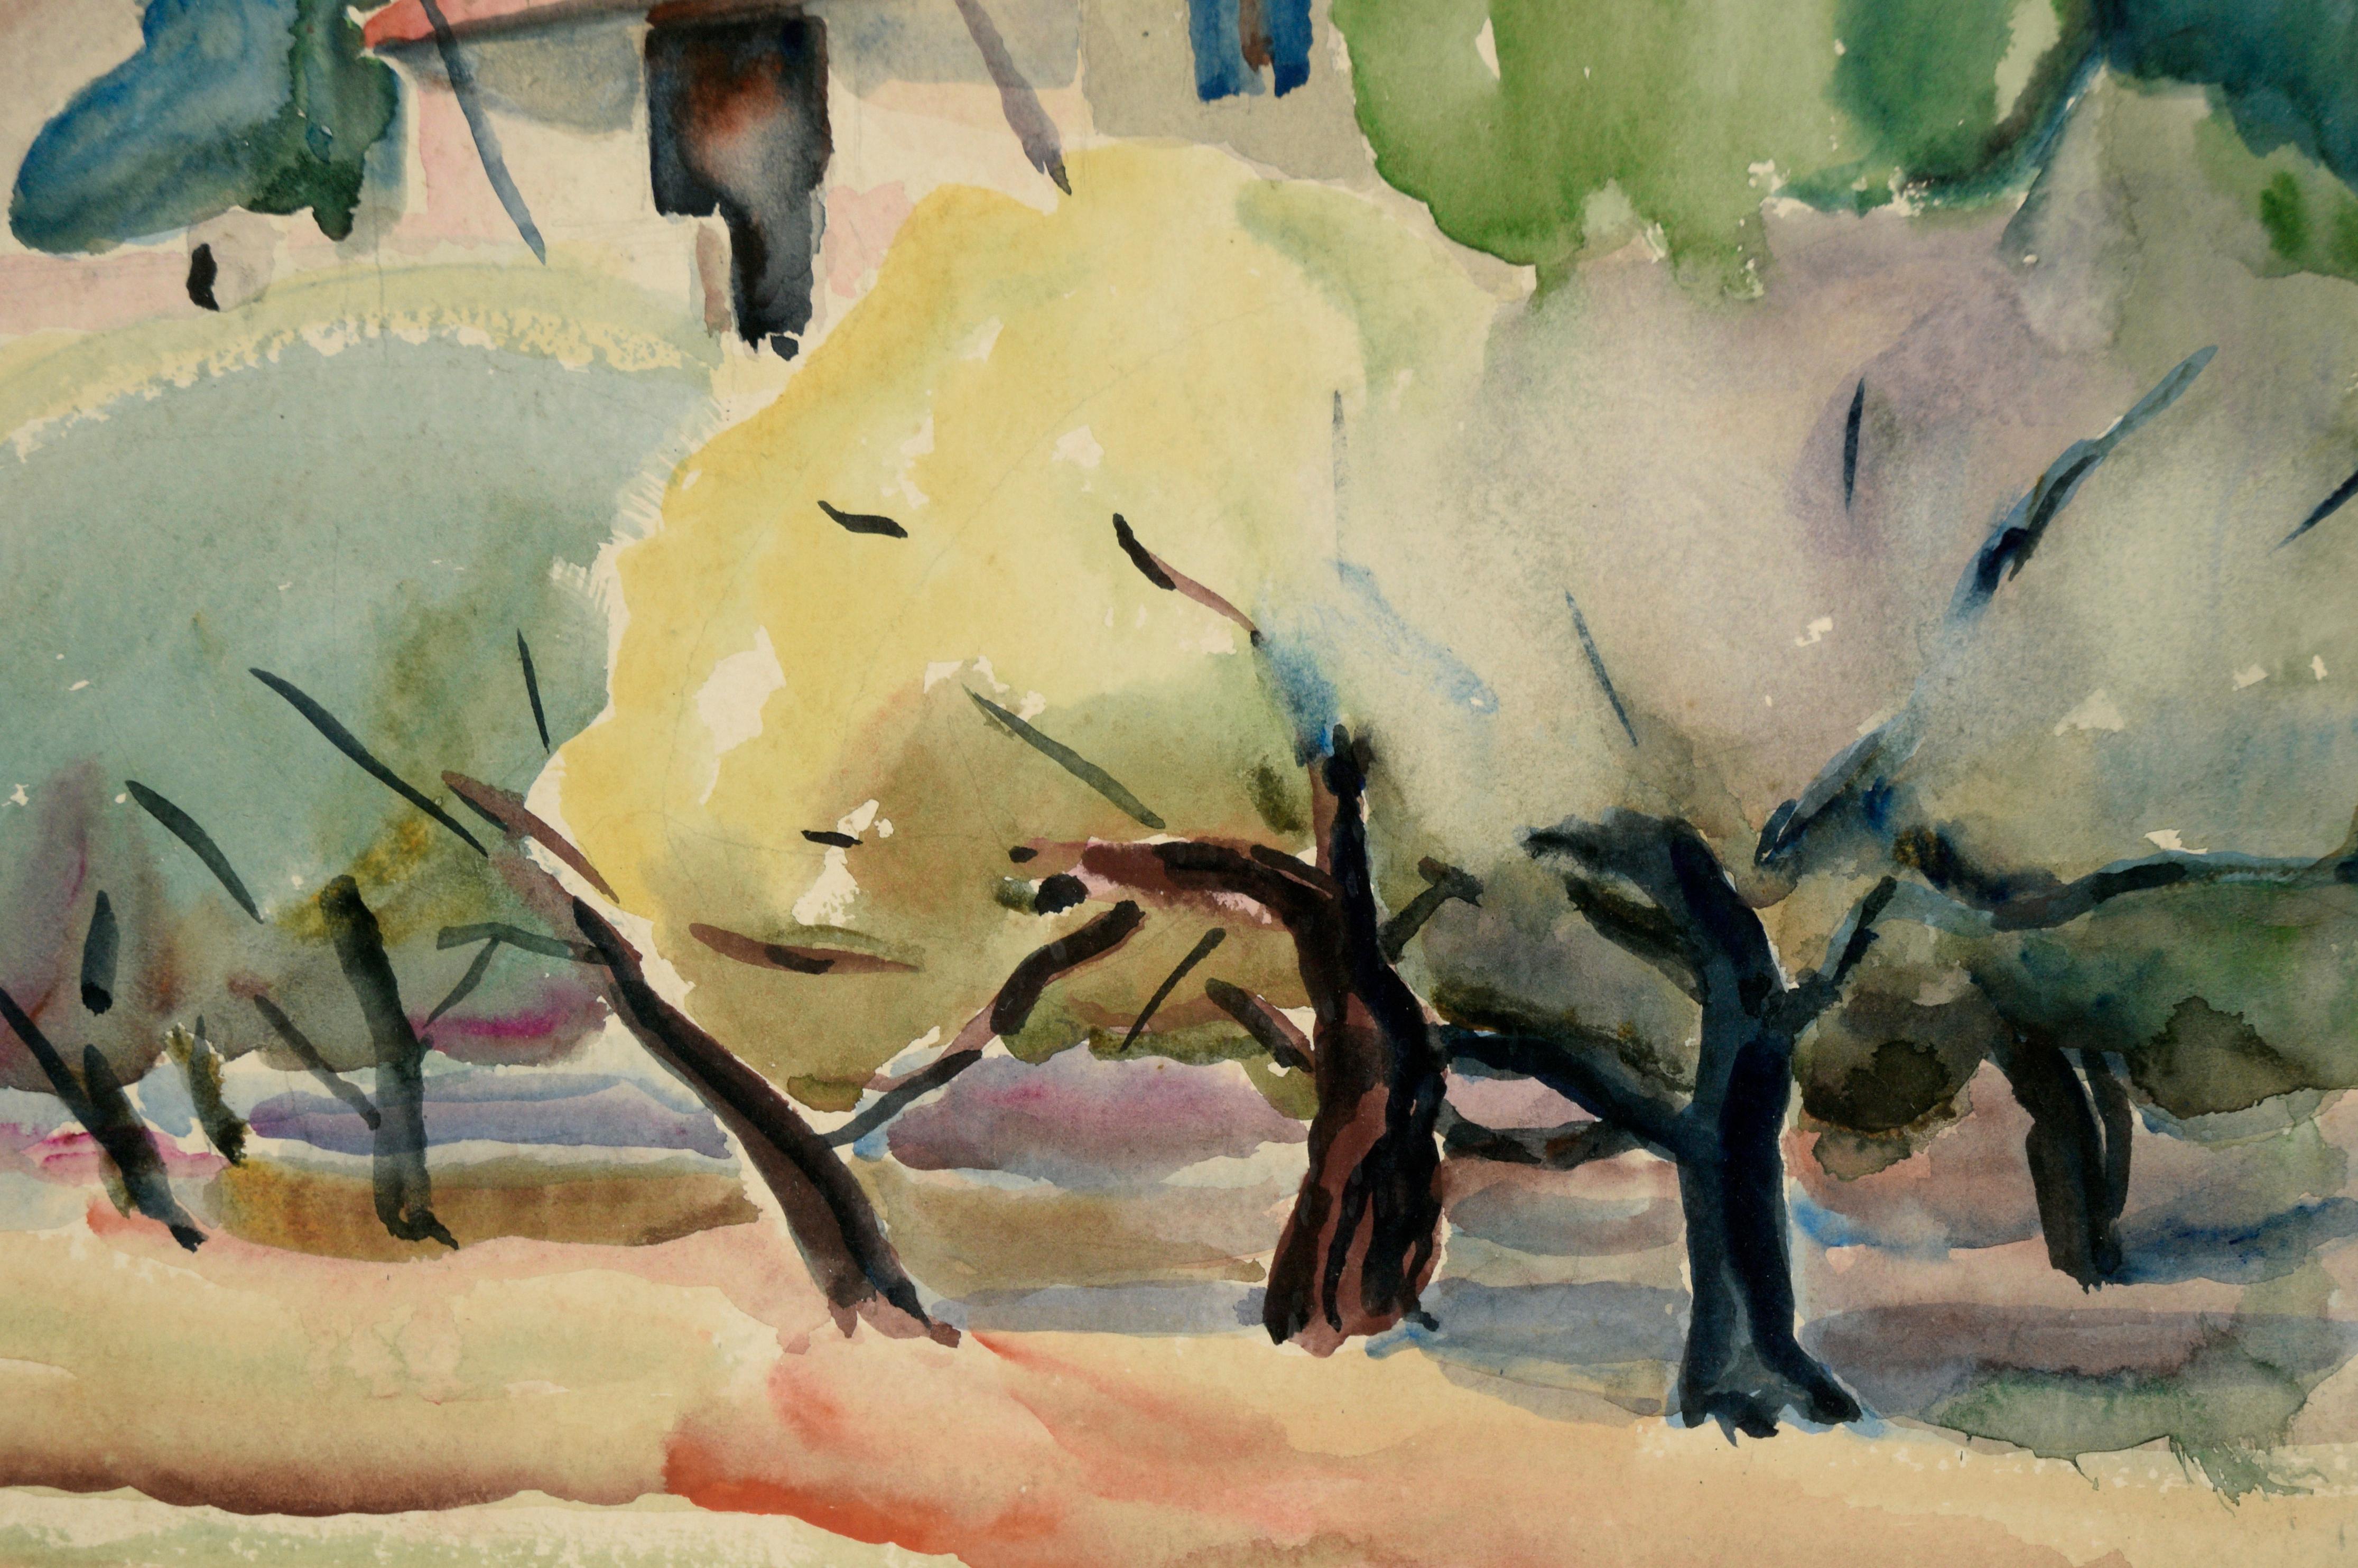 Boldly colored watercolor landscape by Emil Armin (American/Rumanian, 1882-1972). A house with a bright red roof is nestled between some trees at the bottom of a hillside. The trees are depicted as large, voluminous shapes, giving them a solid